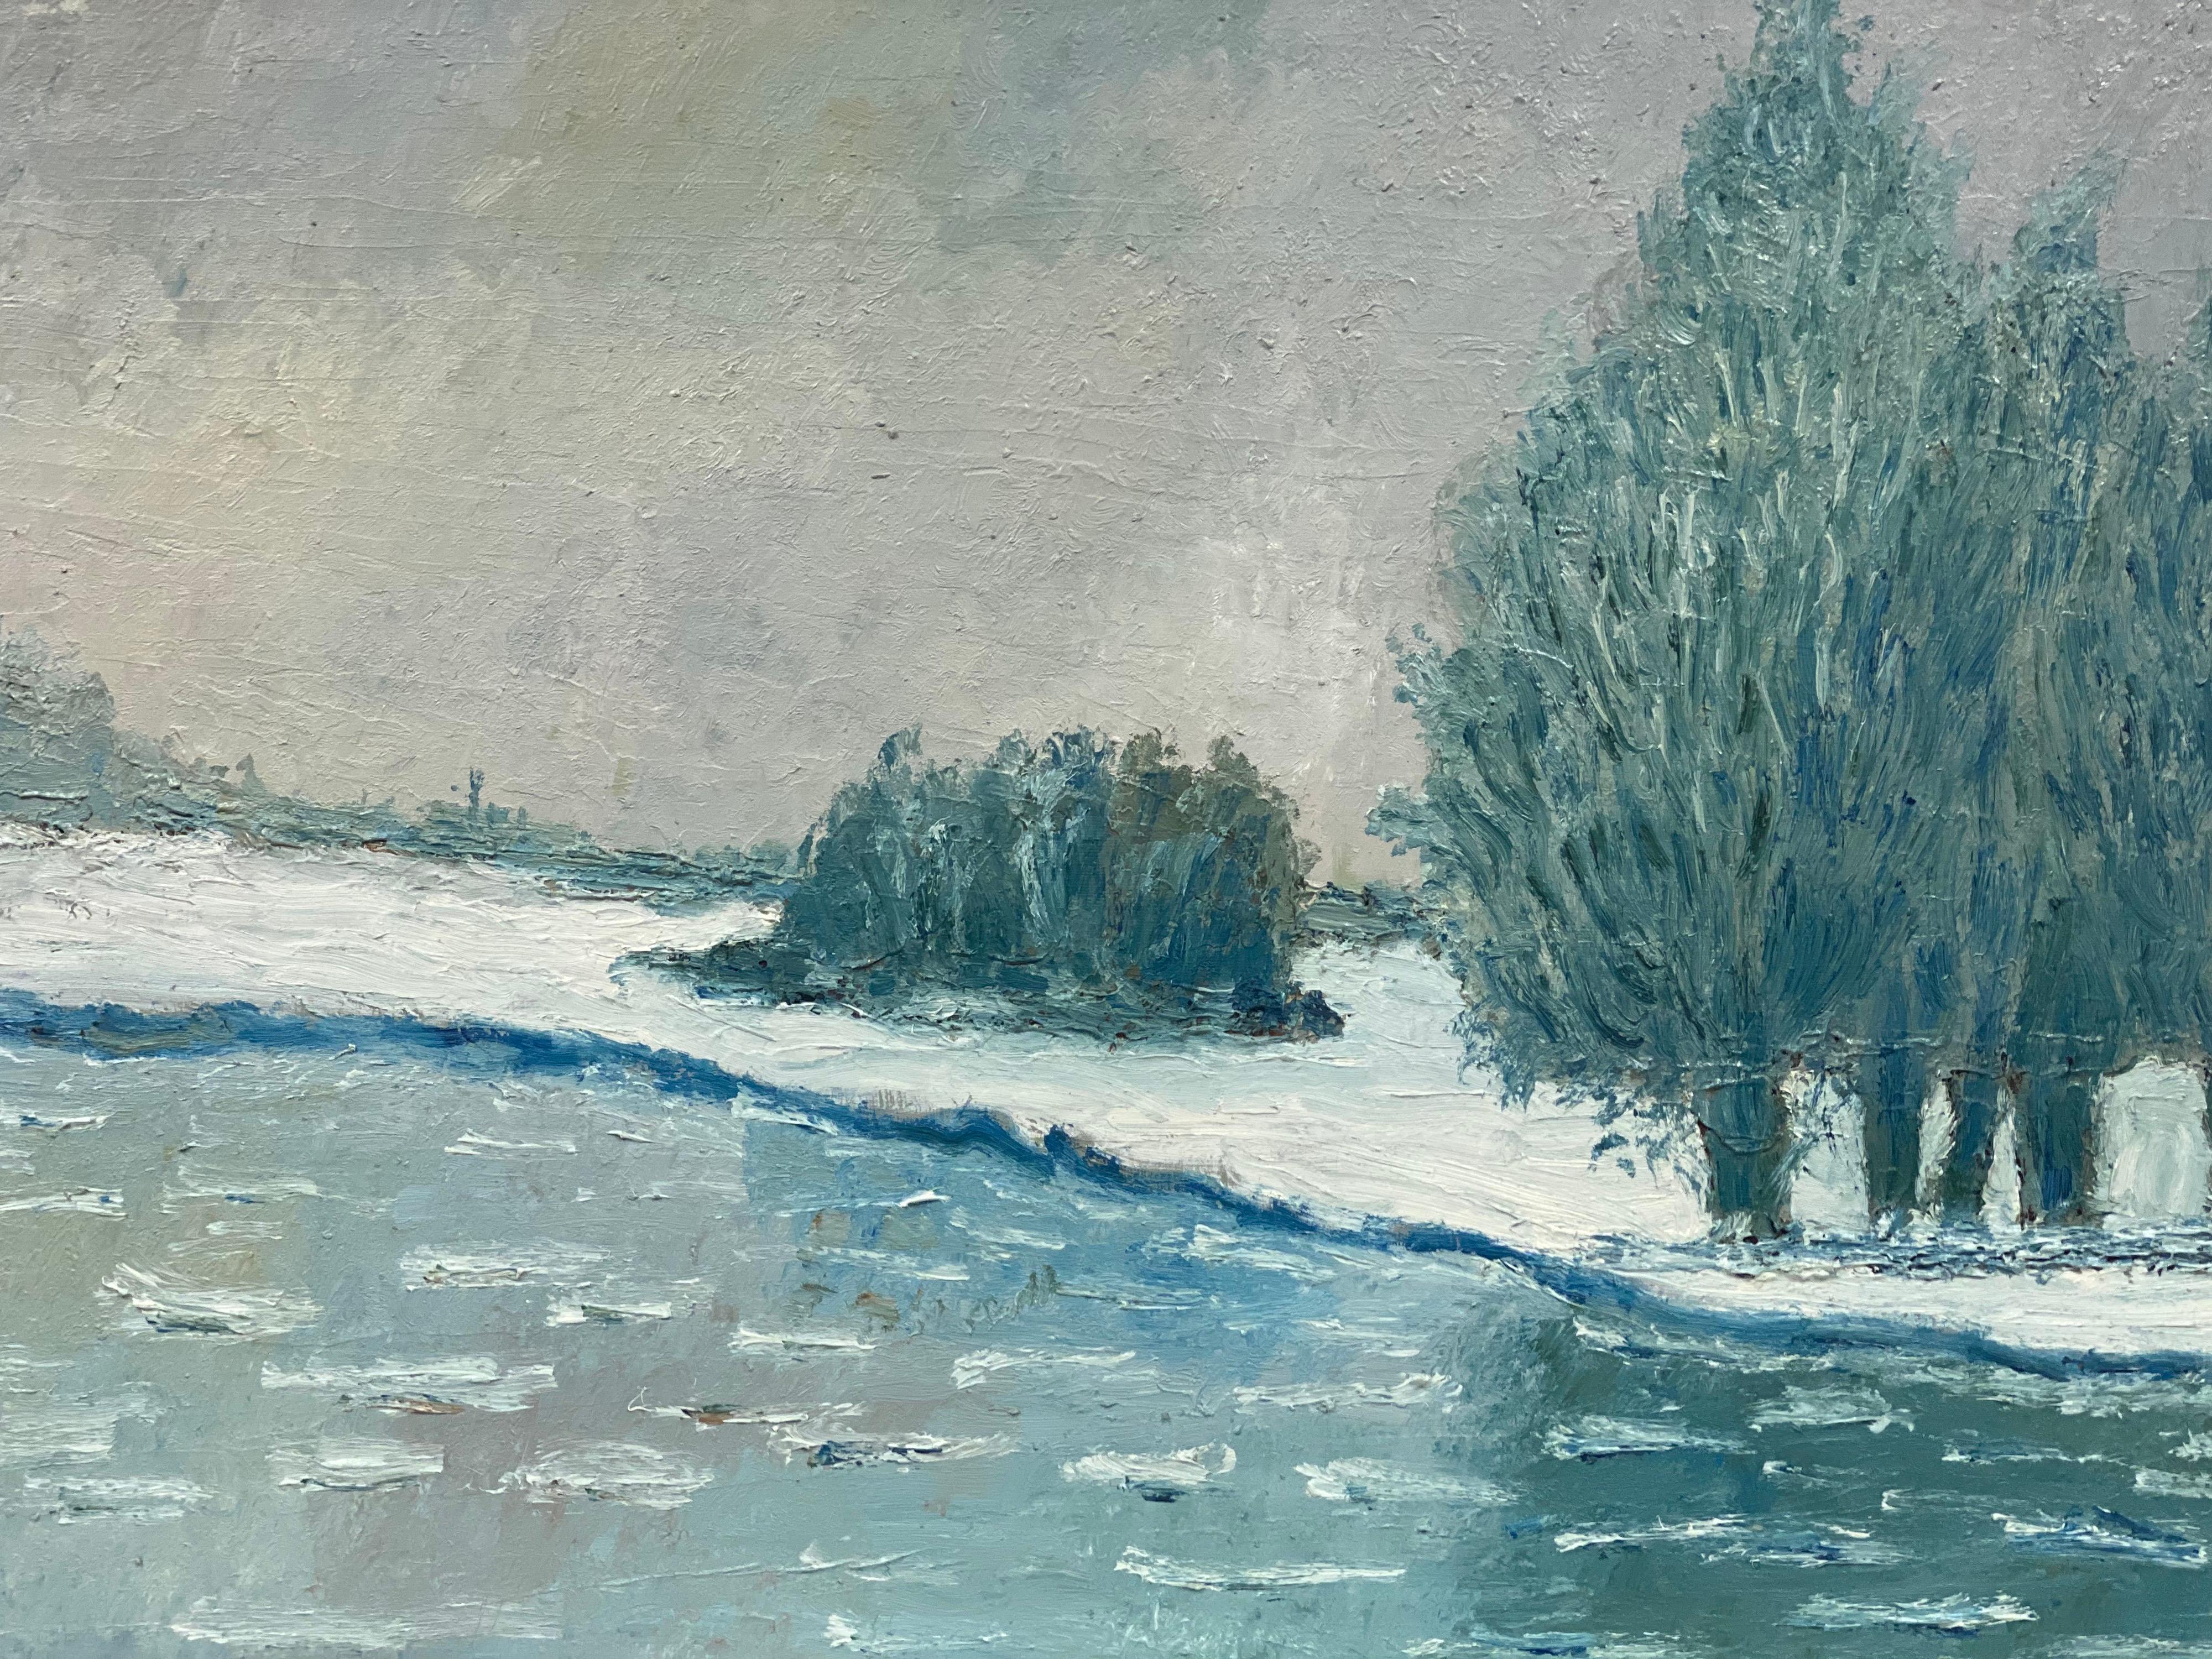 Winter Landscape
by Fernand Audet (French, Tarascon 1923- Mulhouse 2016)
oil painting on canvas, unframed

painting: 21.5 x 29 inches

A superb 20th century oil painting by the listed French Impressionist artist, Fernand Audet (1923-2016). The